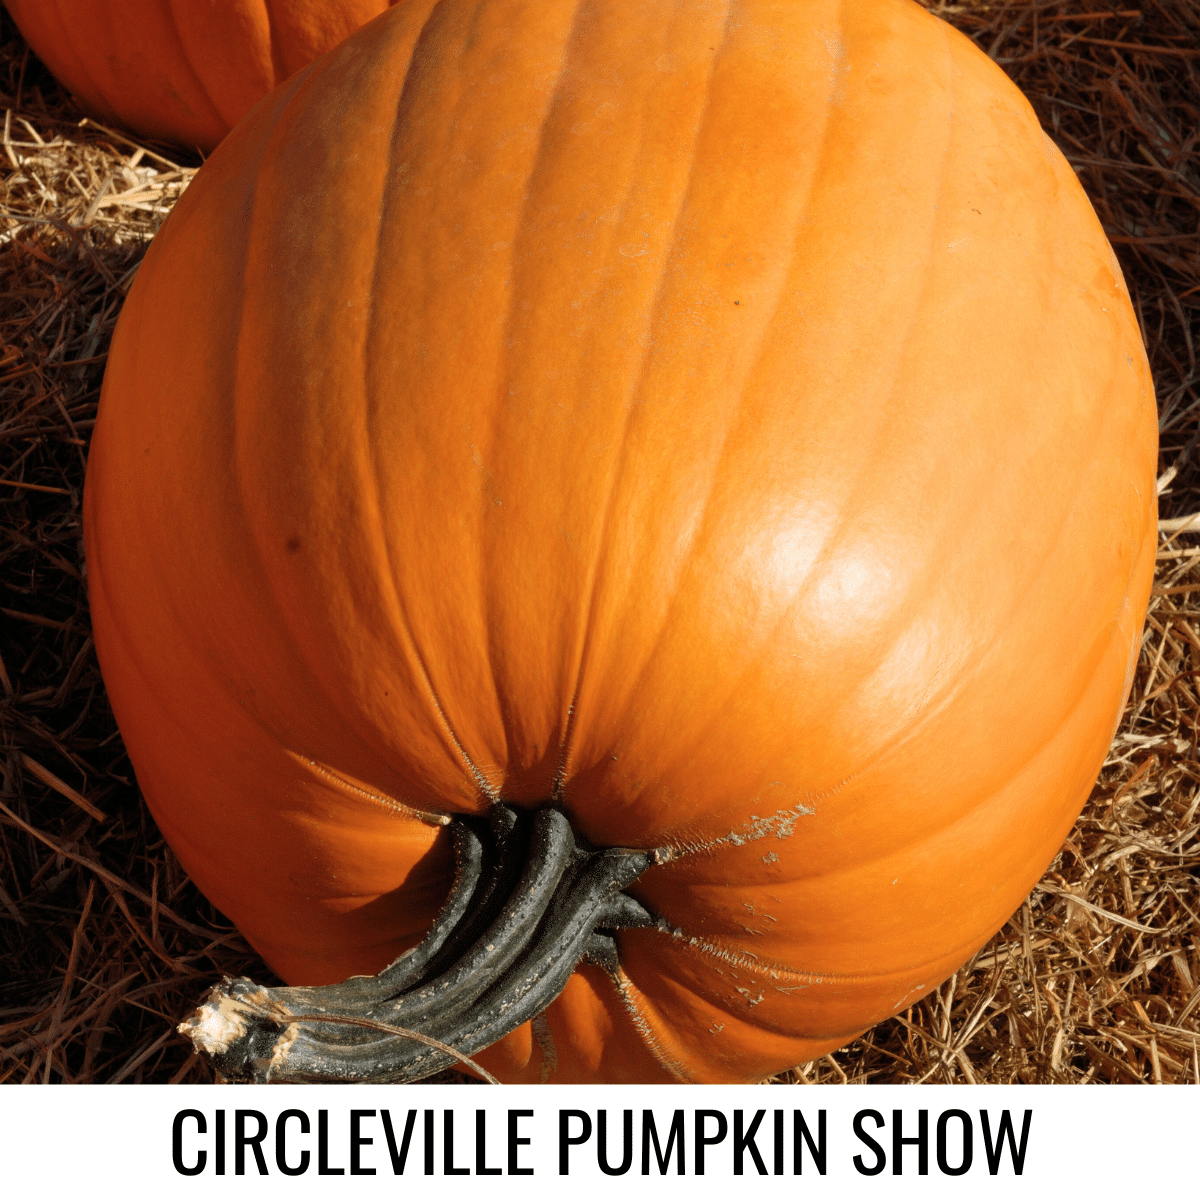 square image with a close up photo of a large orange pumpkin. A white strip at the bottom has the text Circleville Pumpkin Show. Image via Canva pro license